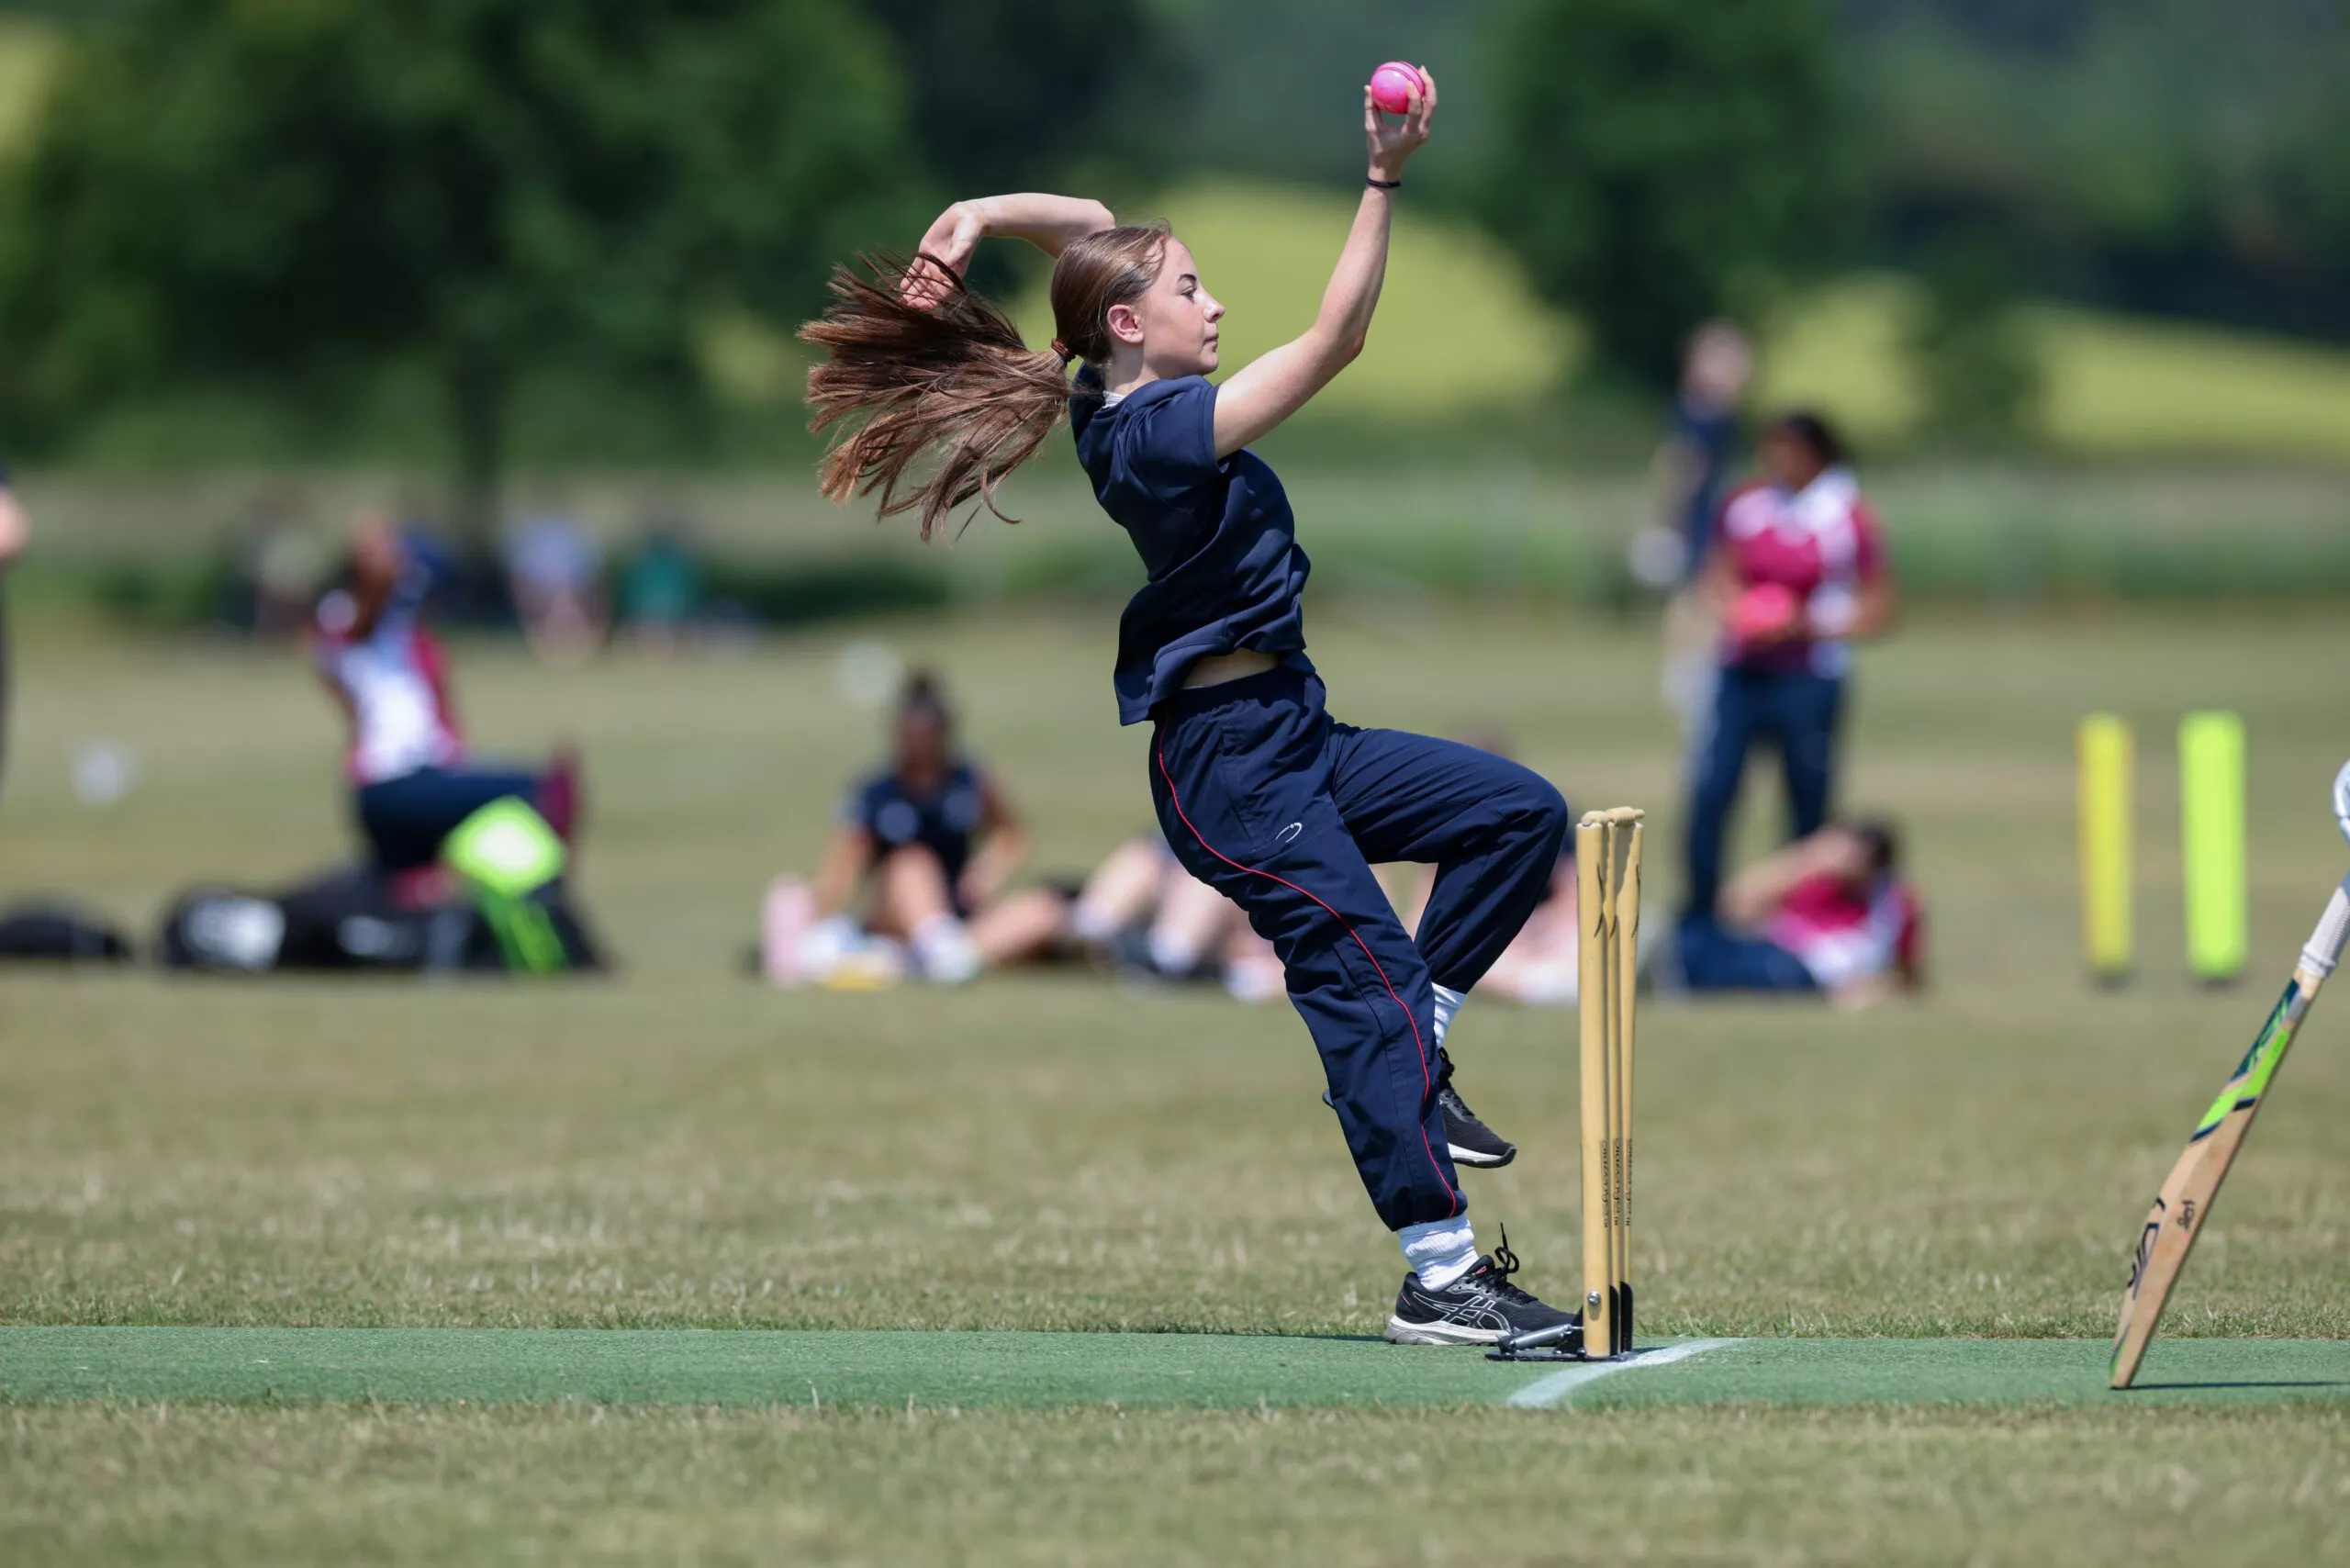 The growth of Girls Cricket at Berkhamsted